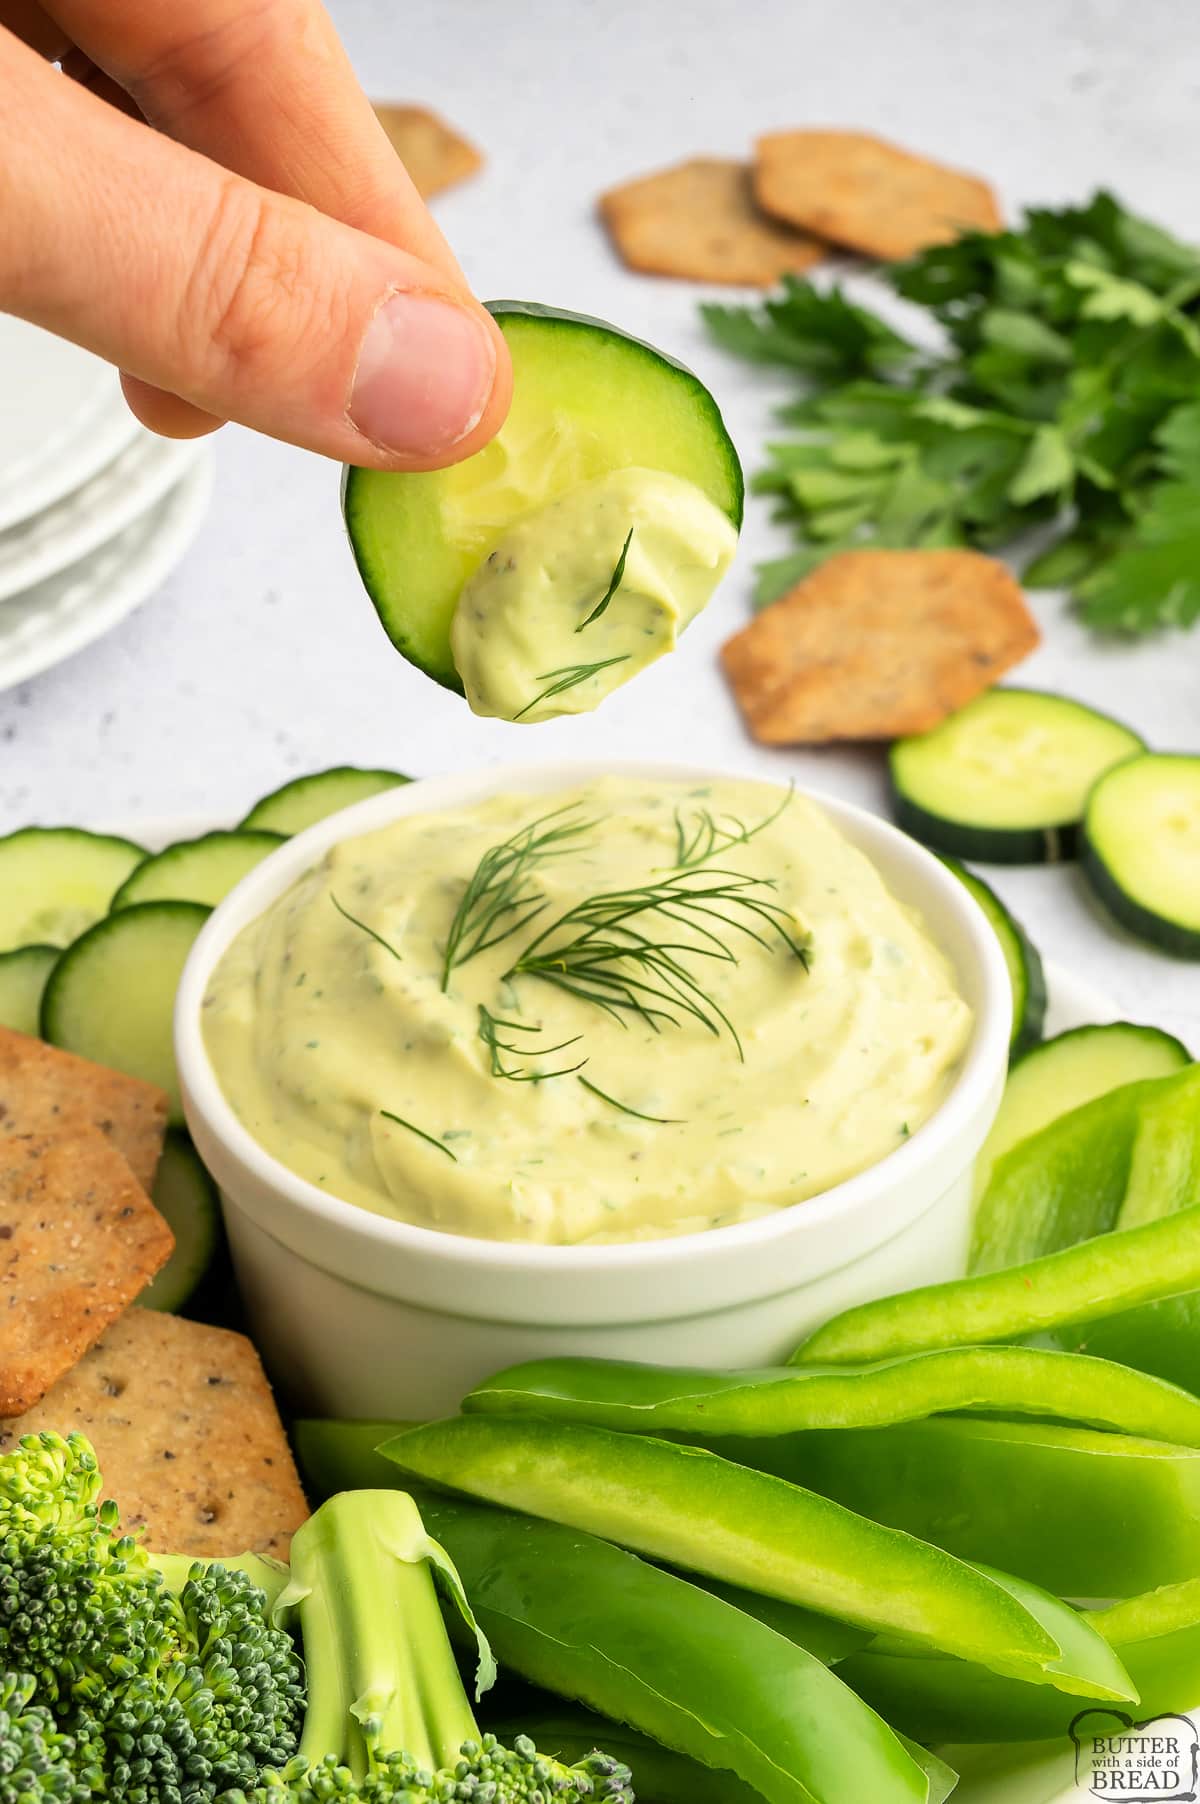 Cucumber dipped in homemade ranch dressing with avocado